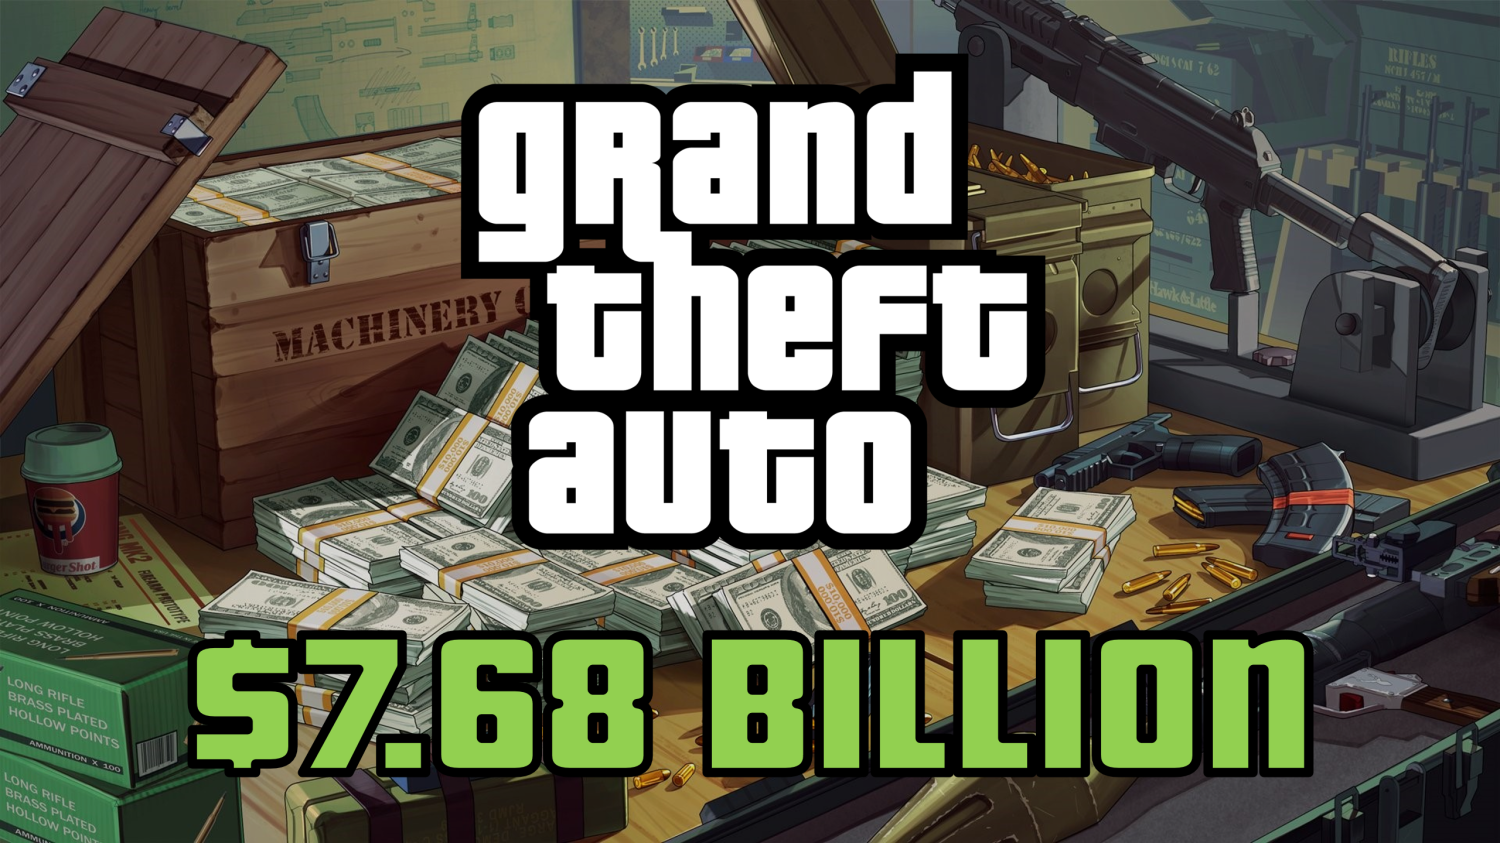 Grand Theft Auto earnings at 7.68 billion since GTA V launch